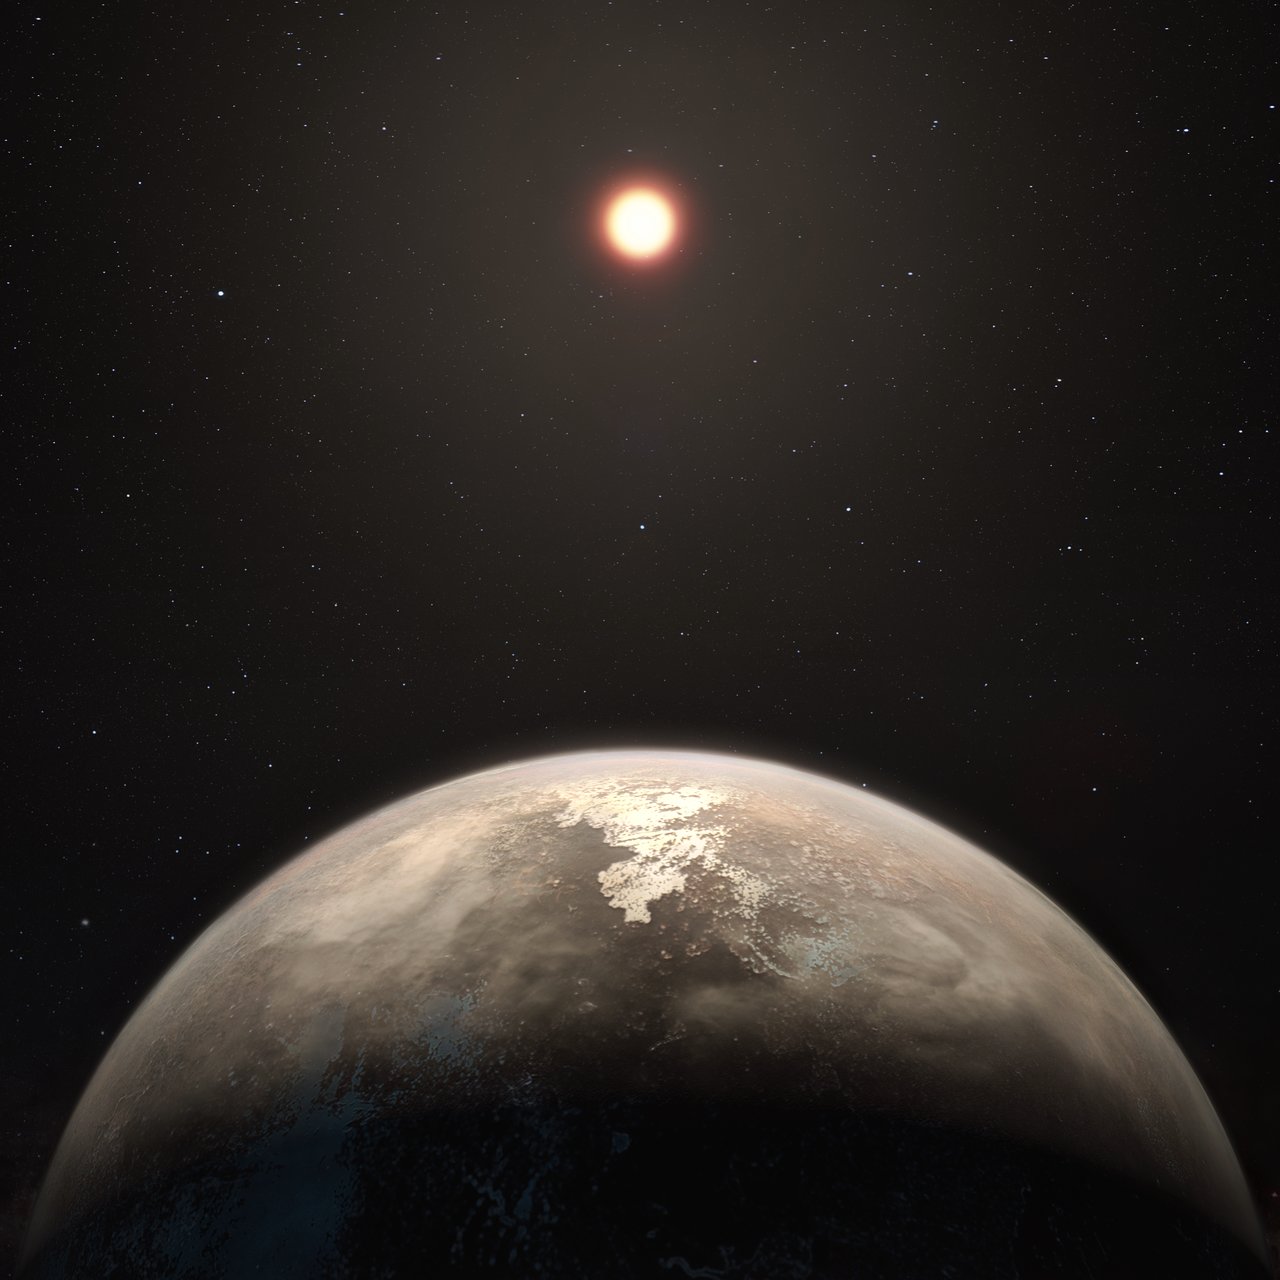 This artist’s impression shows the temperate planet Ross 128 b, with its red dwarf parent star in the background. It is provided courtesy of ESO/M. Kornmesser.